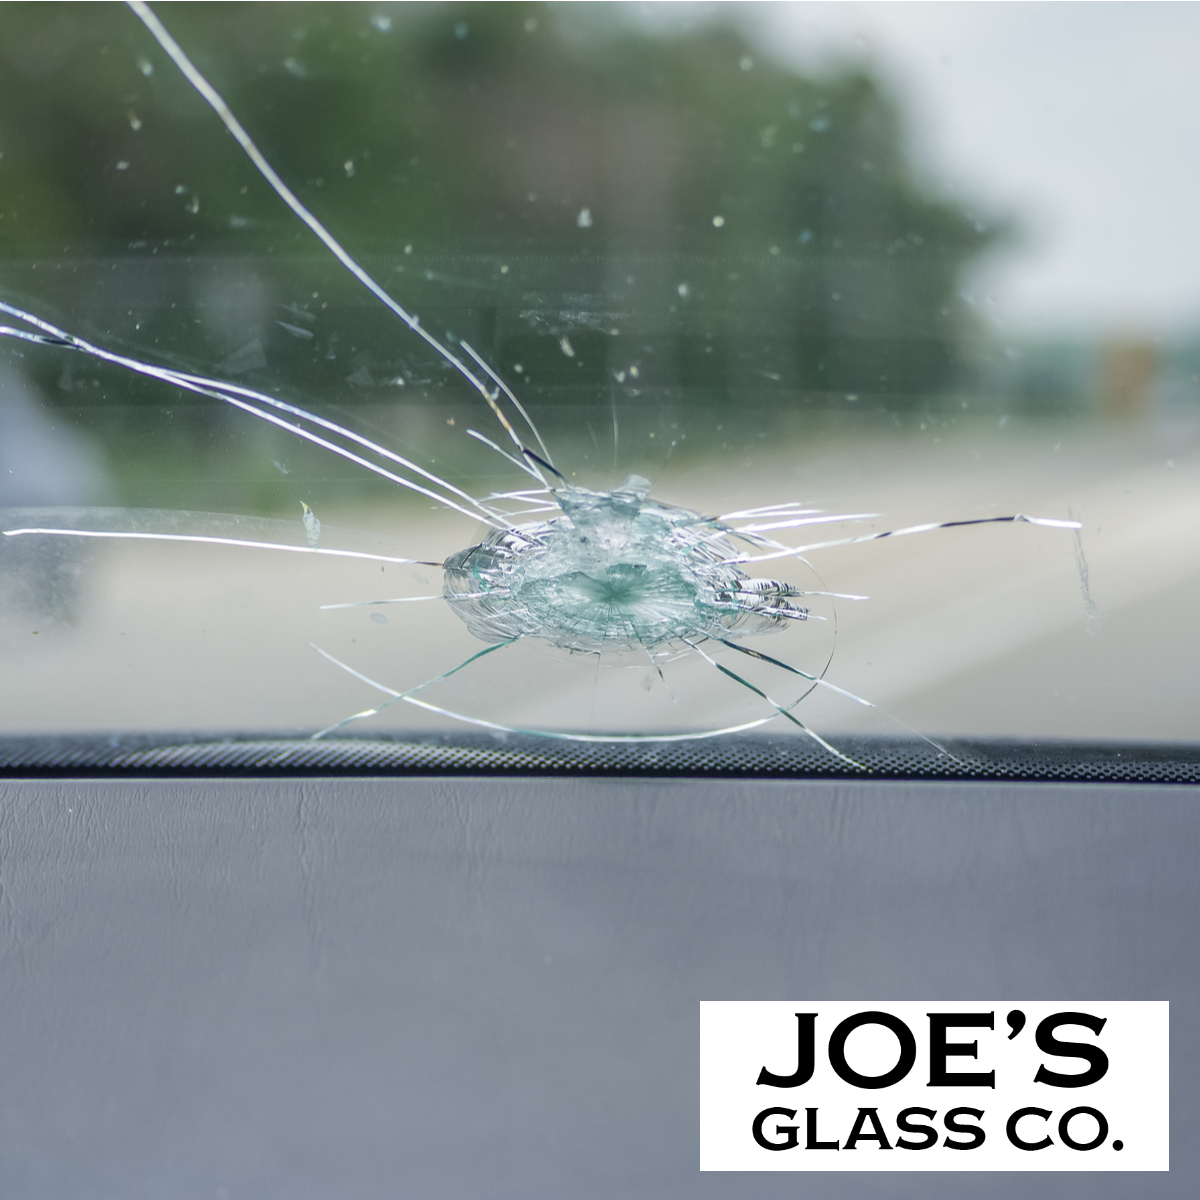 Joe’s Glass Co. is a Reliable Company for Auto Glass Repairs of Chips and Shatters